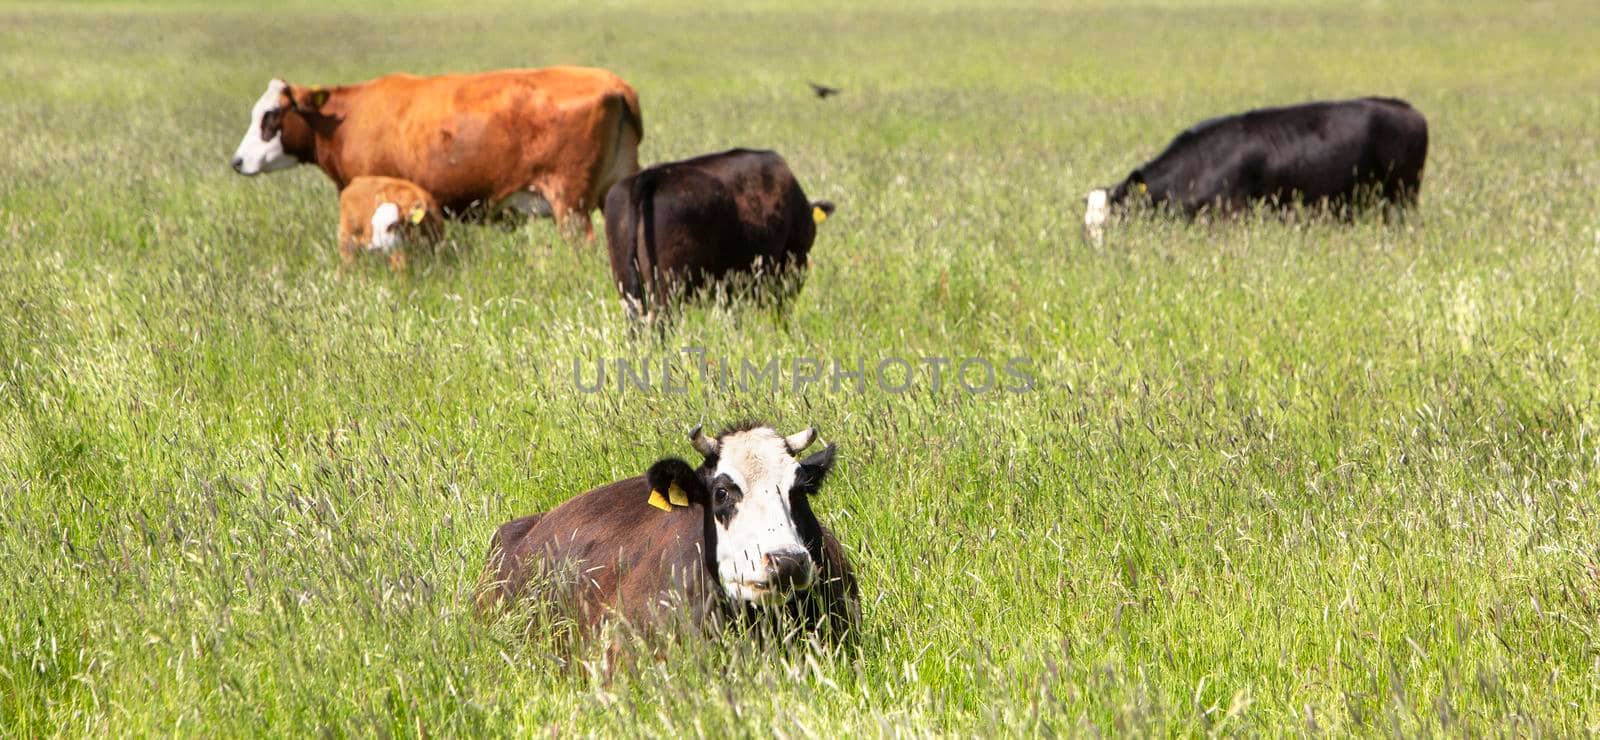 old race of black blaarkop cows with white faces in meadow with long grass in the netherlands